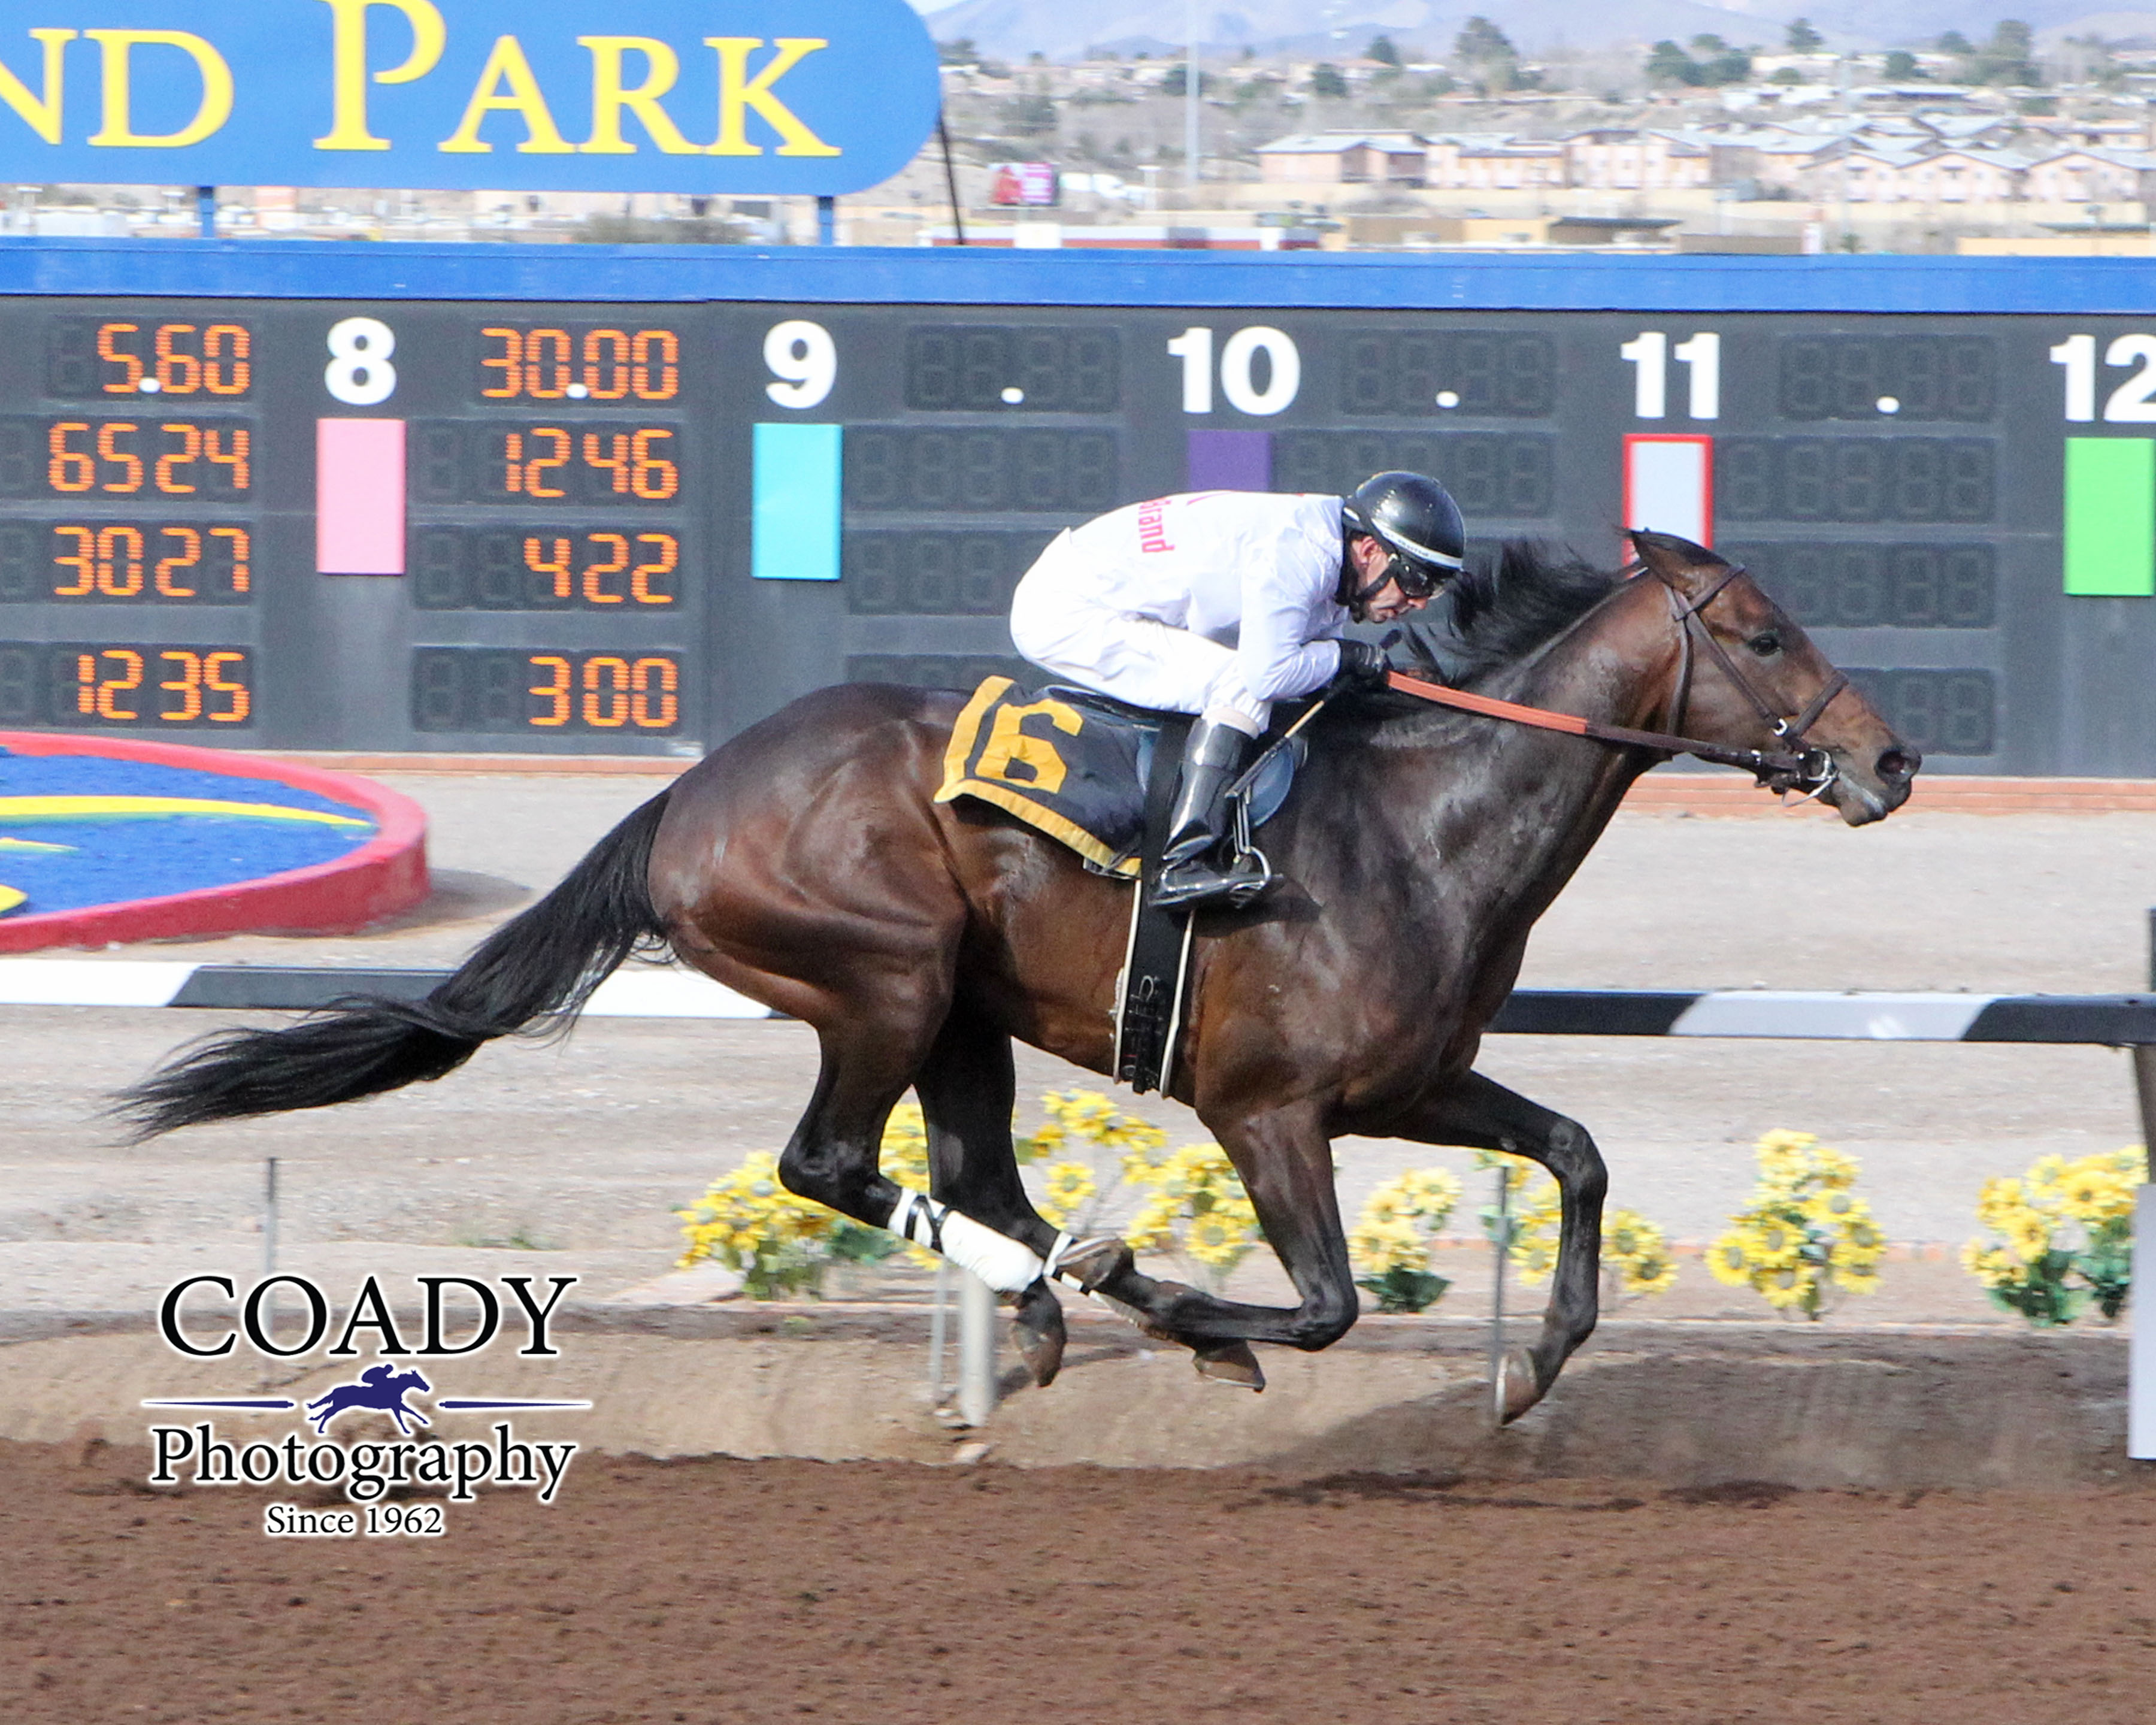 American Dubai has won two straight this winter at Sunland Park. Photo courtesy of Coady Photography.